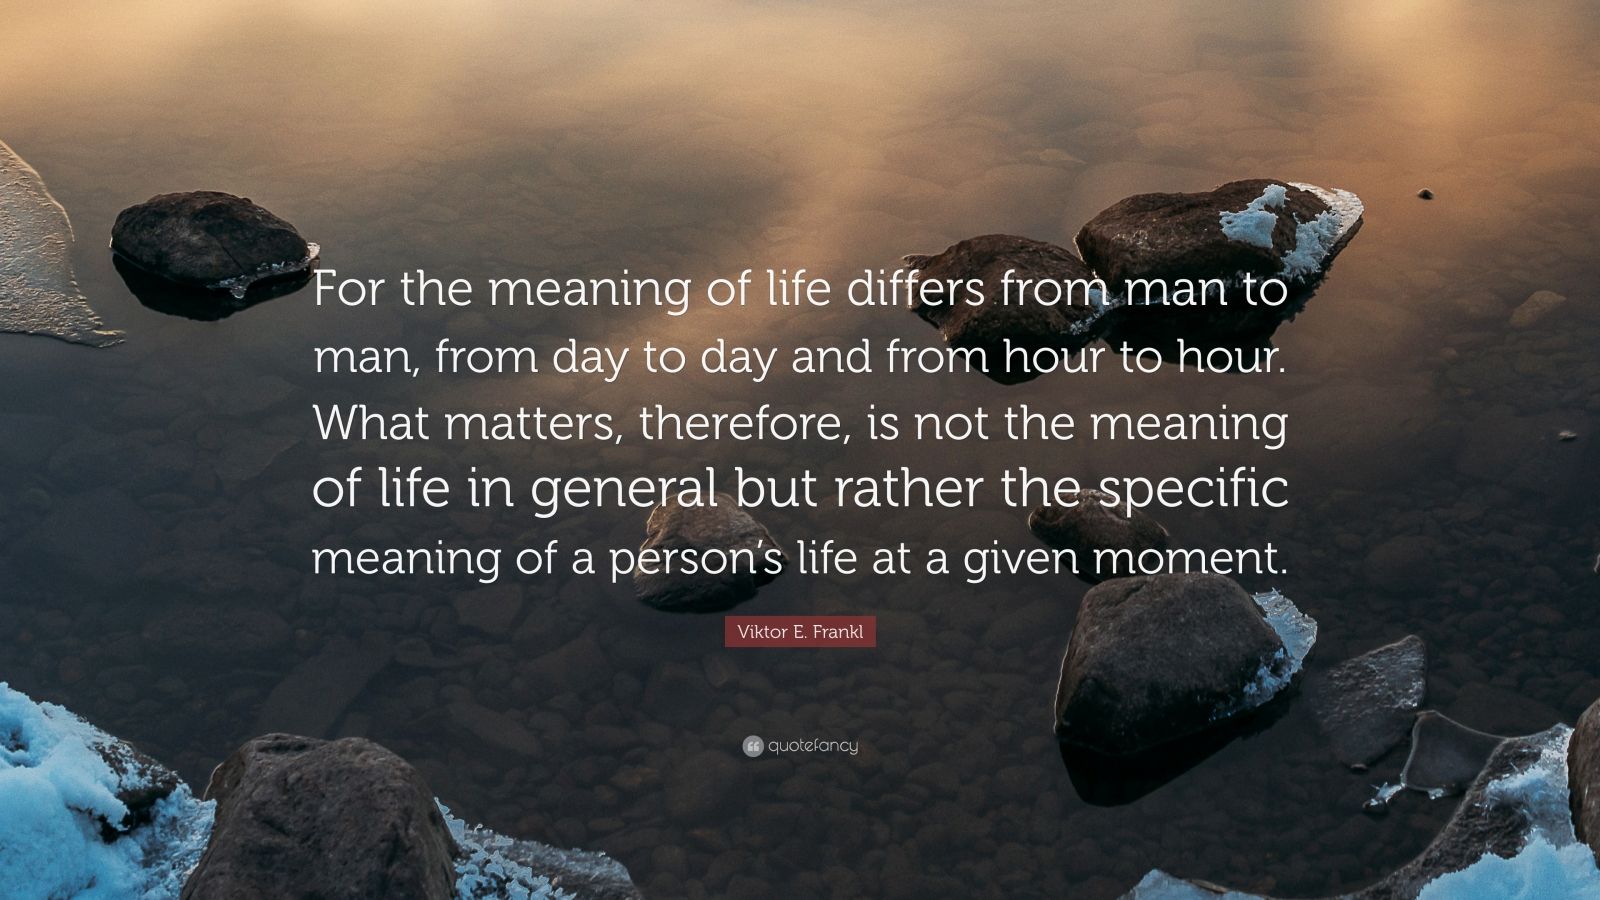 Viktor E Frankl Quote “For the meaning of life differs from man to